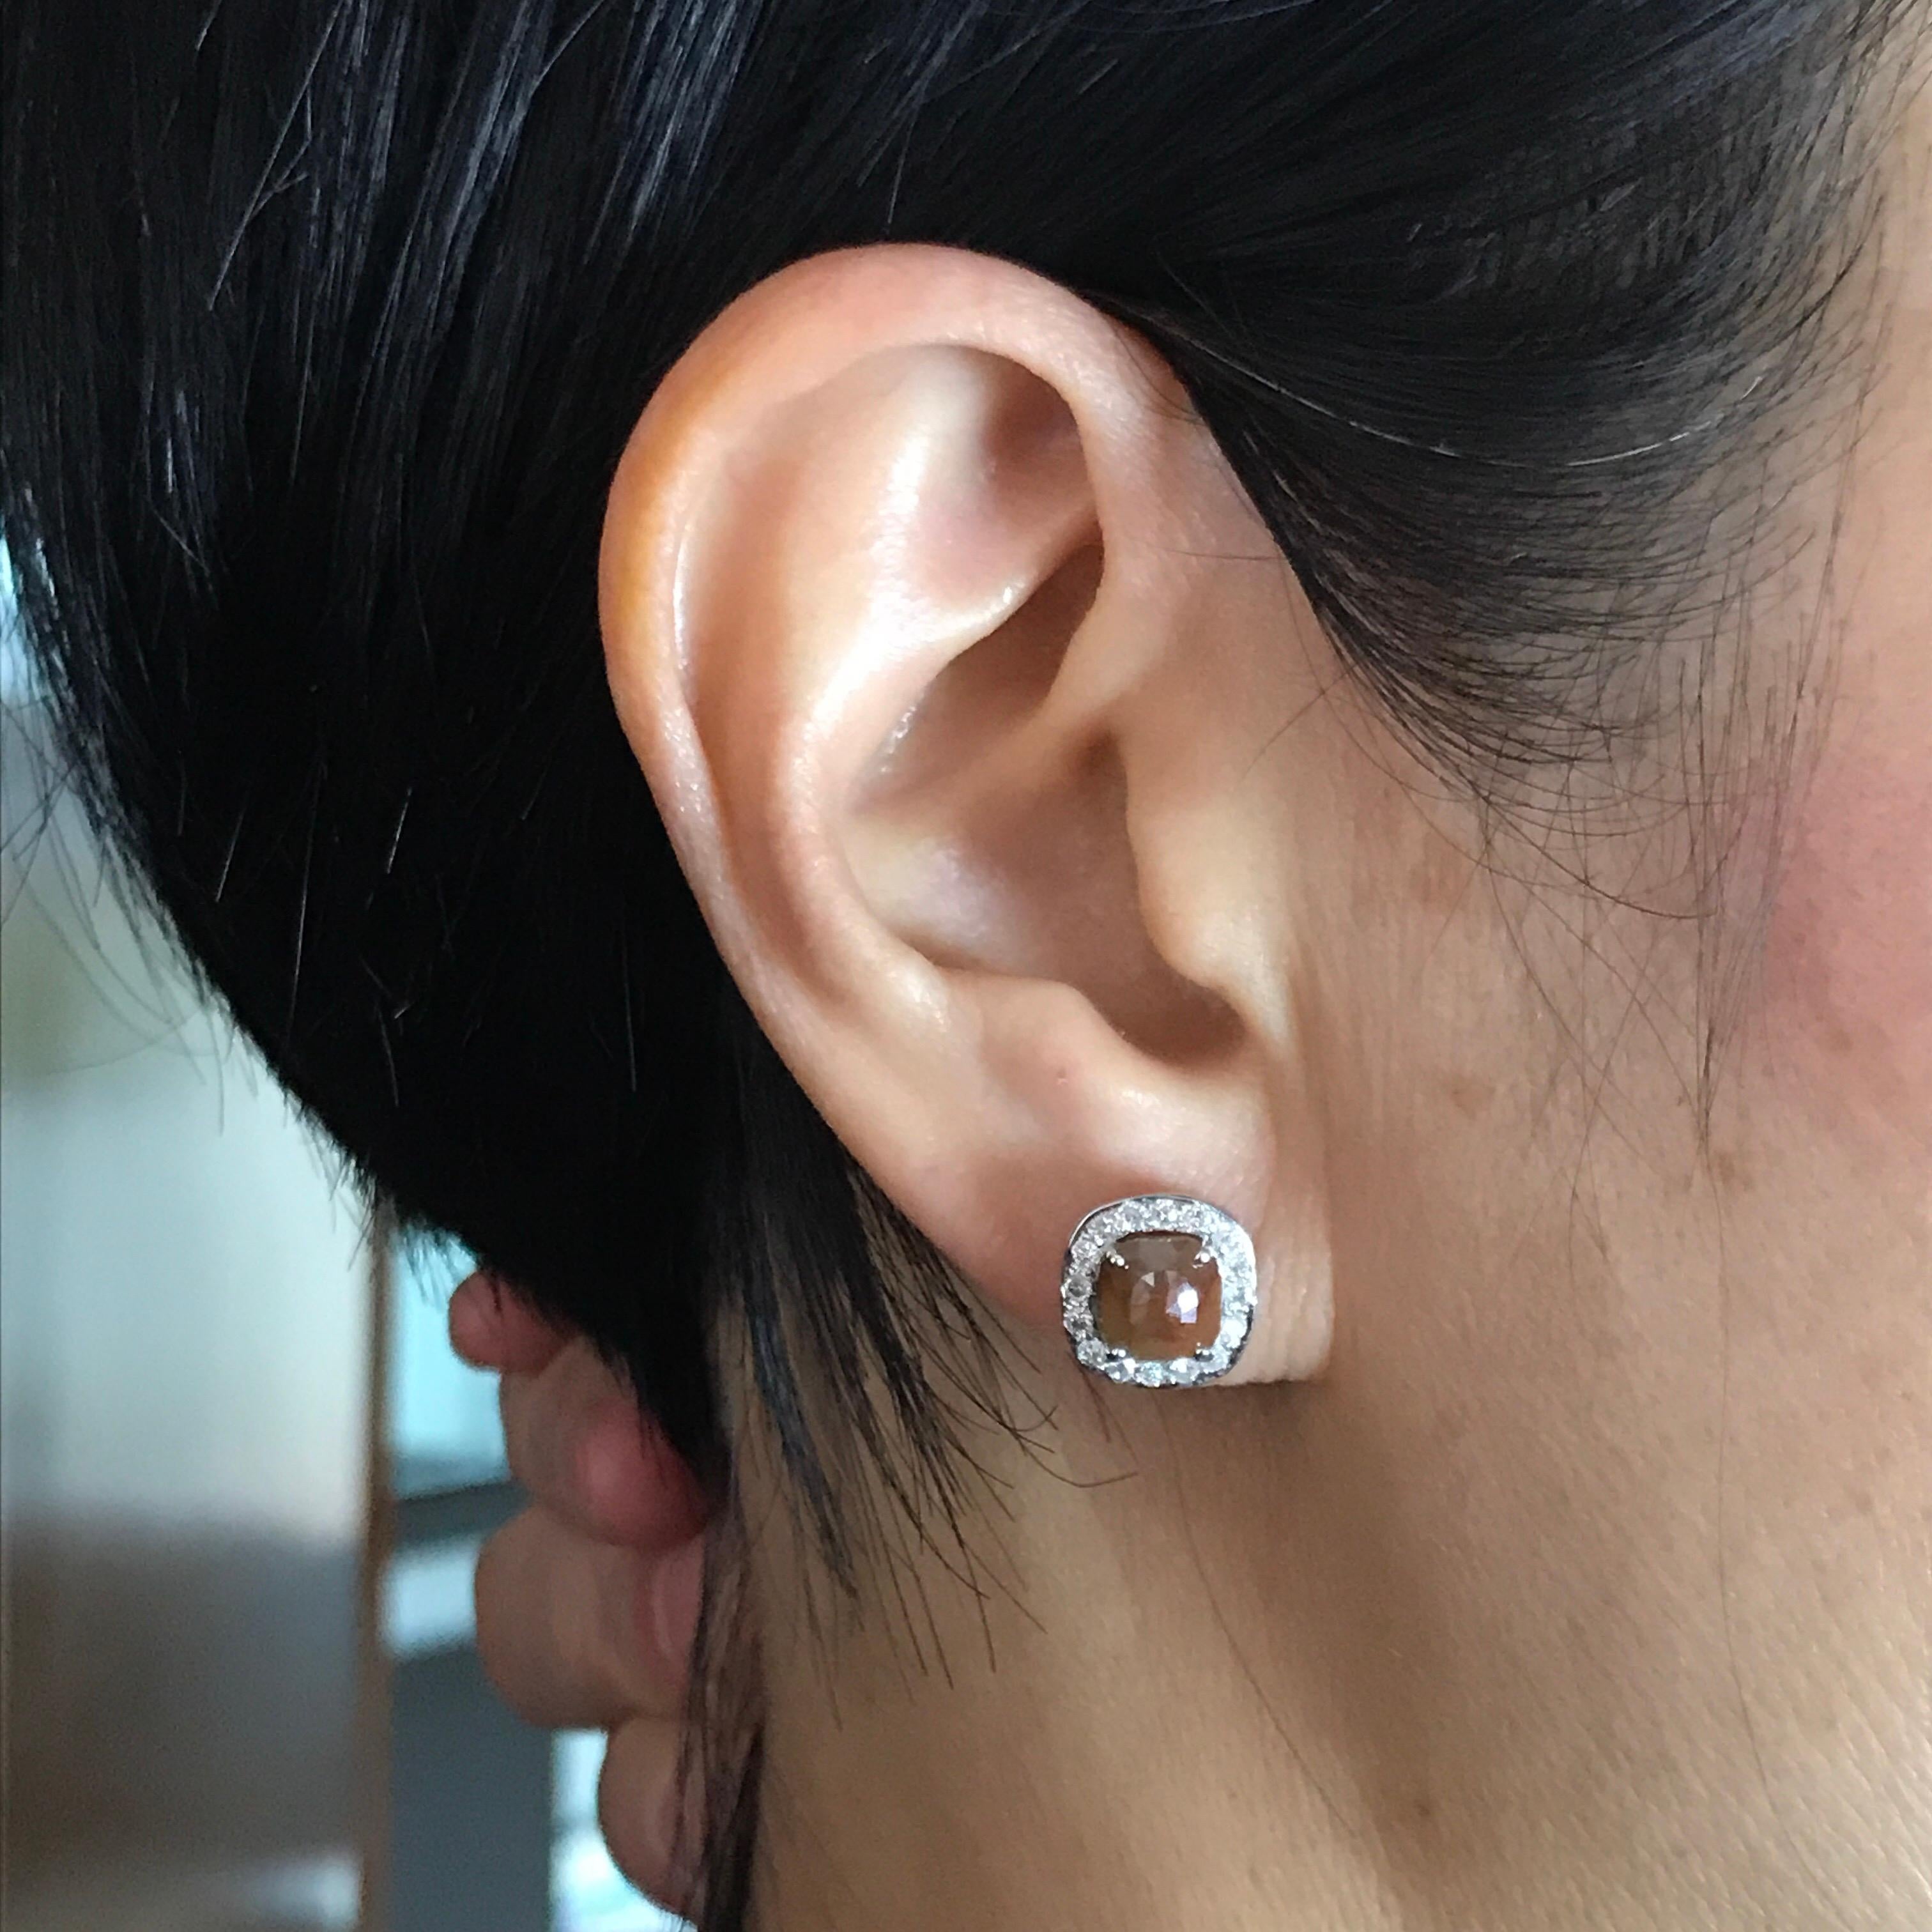 A beautiful pair of simple, and elegant Brown Diamond Earrings surrounded with White diamonds; all set in 18K White Gold. The brown diamonds weigh approximately a carat each. The earrings come with a push back post. 